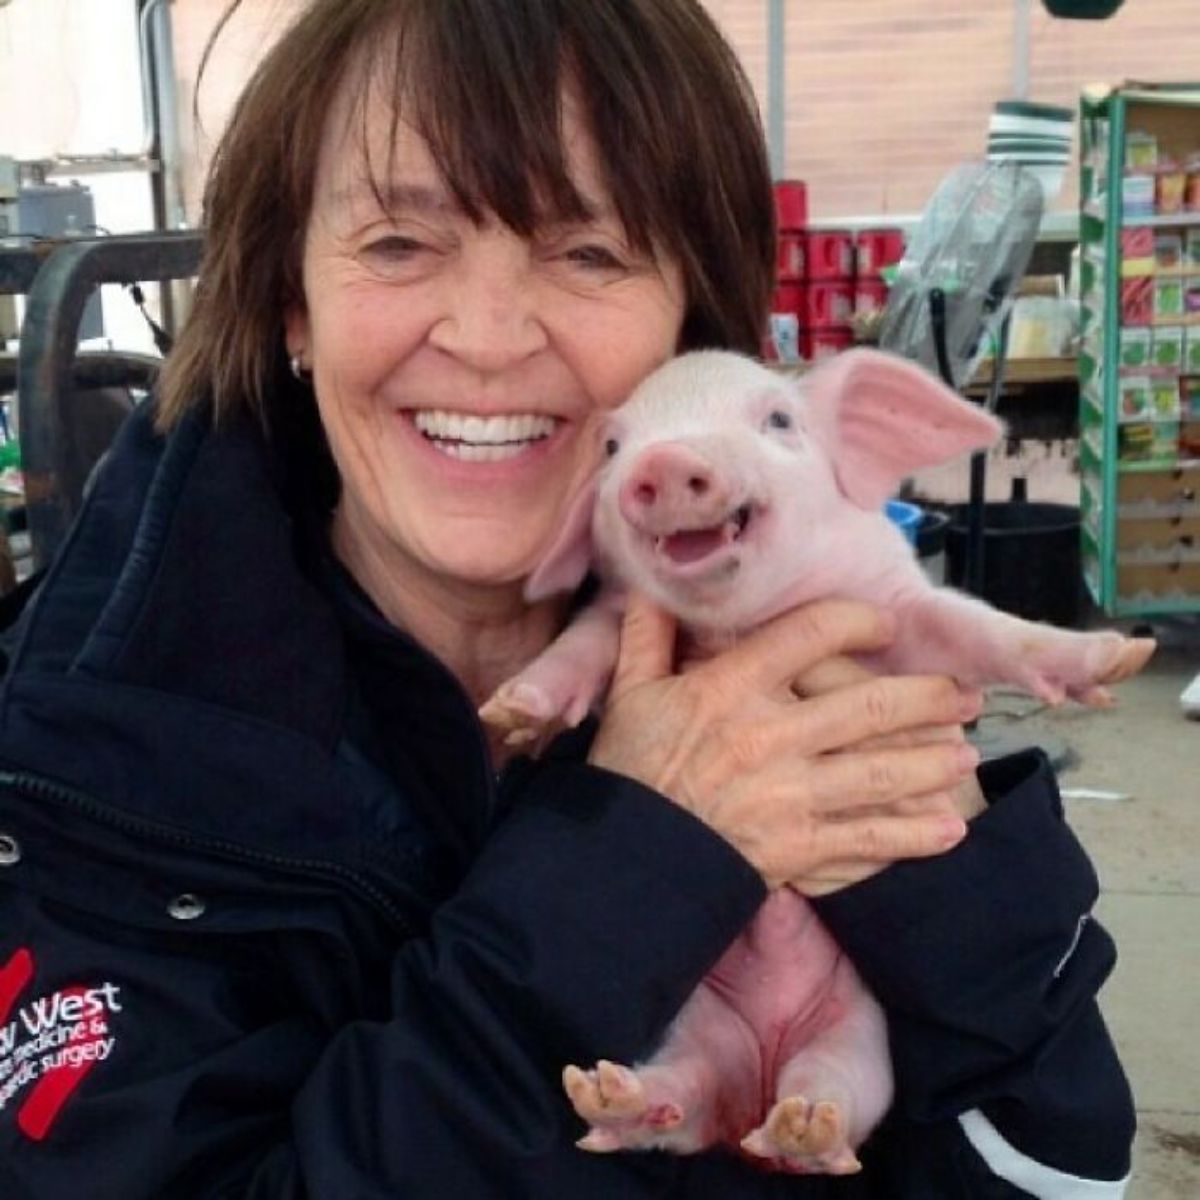 pink piglet with its mouth open being held by a woman